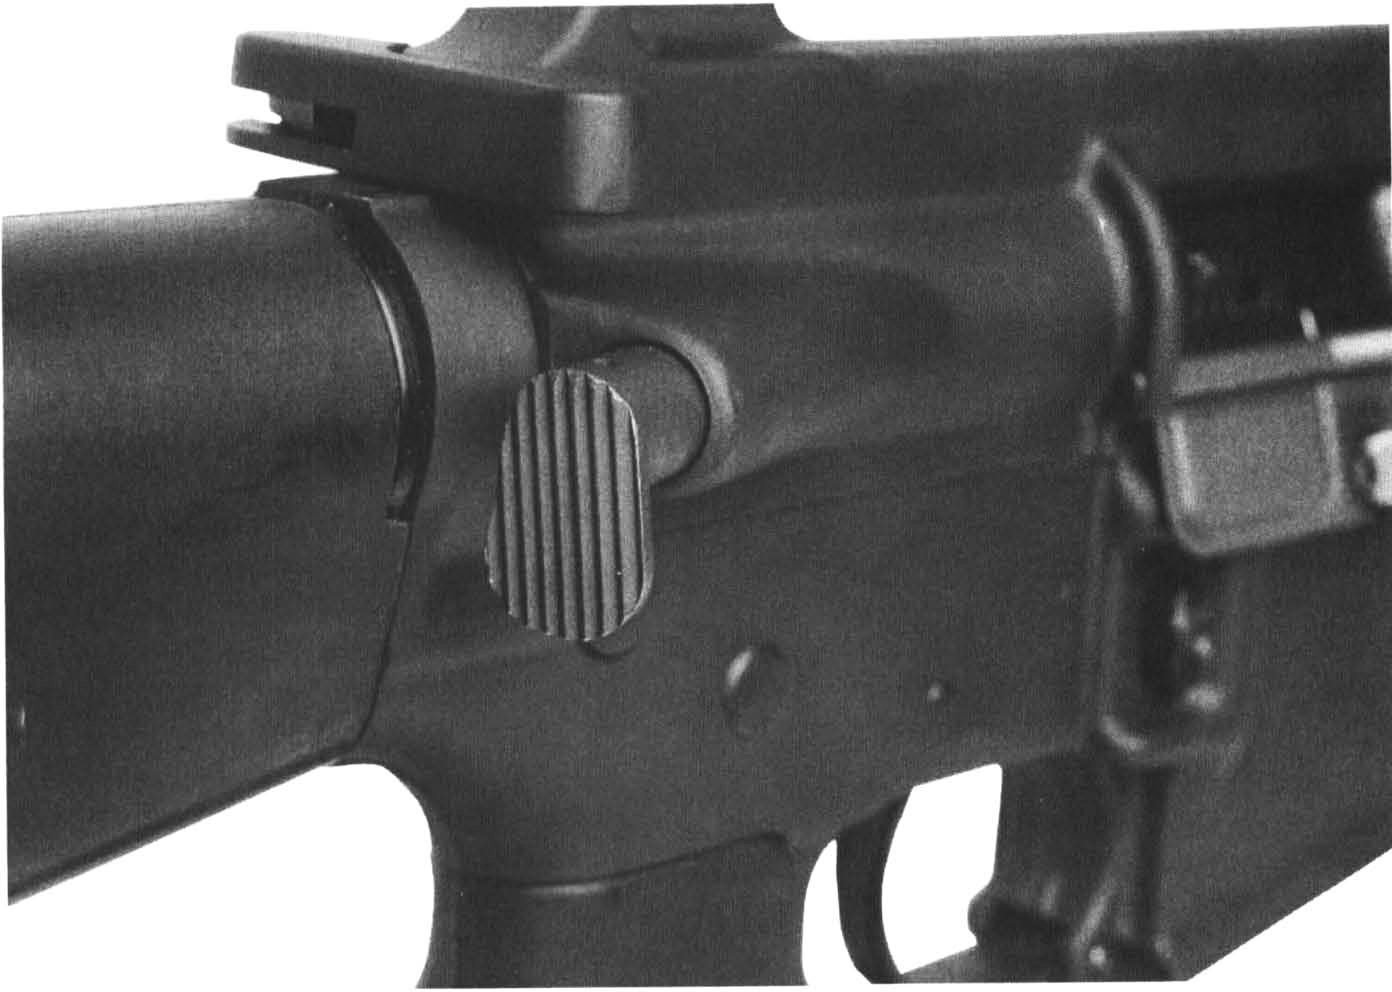 The forward assist bolt closure mechanism. The M16A1 (shown) had the “tear drop” style while the new M16A2 has a round button style.